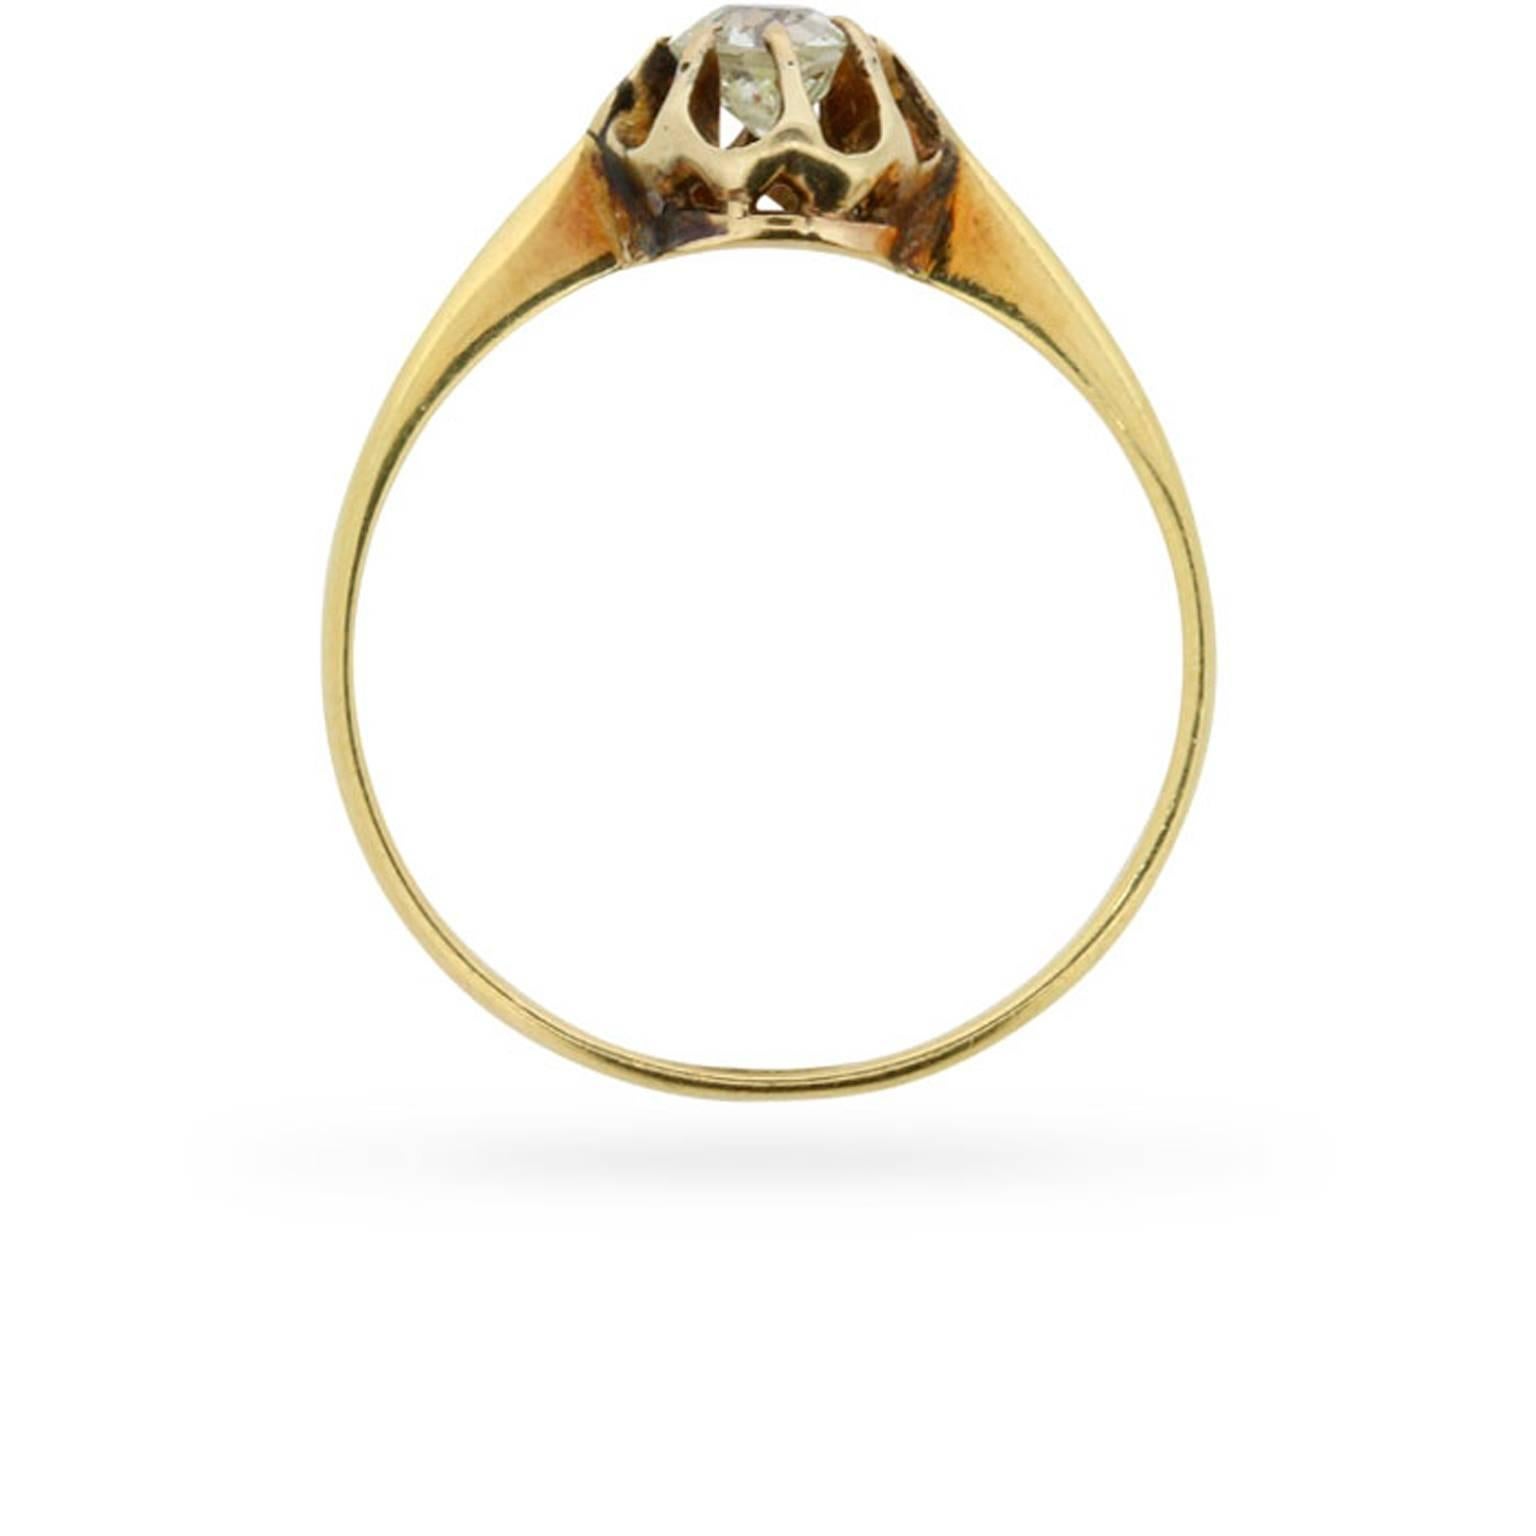 Eight curving claws secure an old cut diamond within its original mounting at the centre of this 18 carat yellow gold engagement ring. This unmistakably handmade antique engagement ring dates from 1905.

Gemstone: Diamond
Stone Shape: Old Cut
Carat